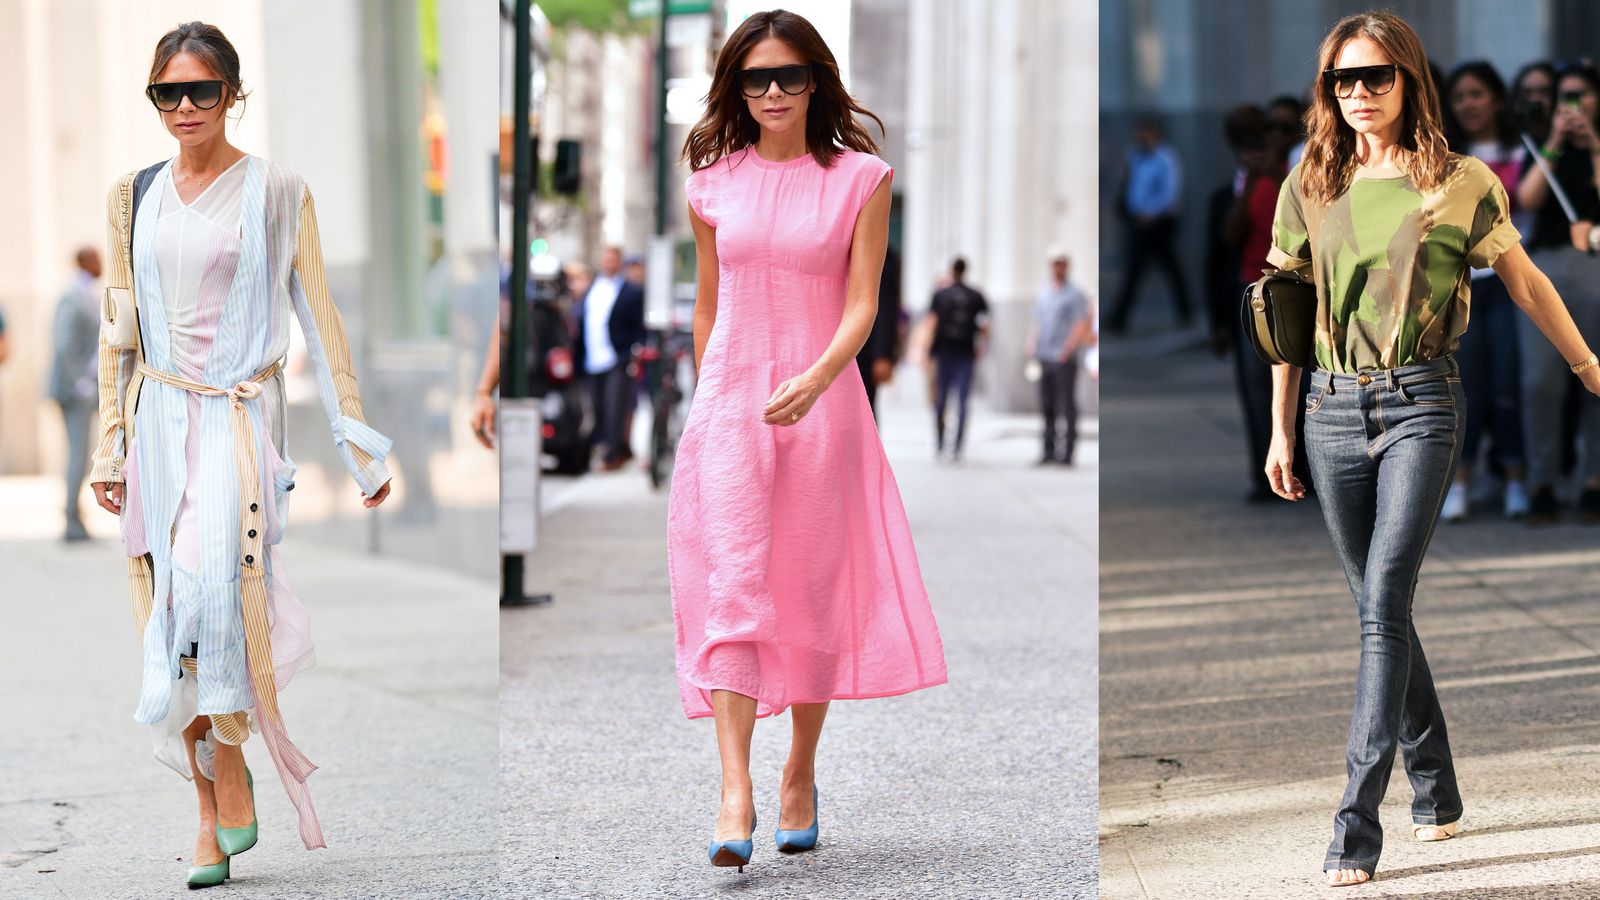 Victoria Beckham Wore a Bright Pink Dress in New York City | Marie Claire